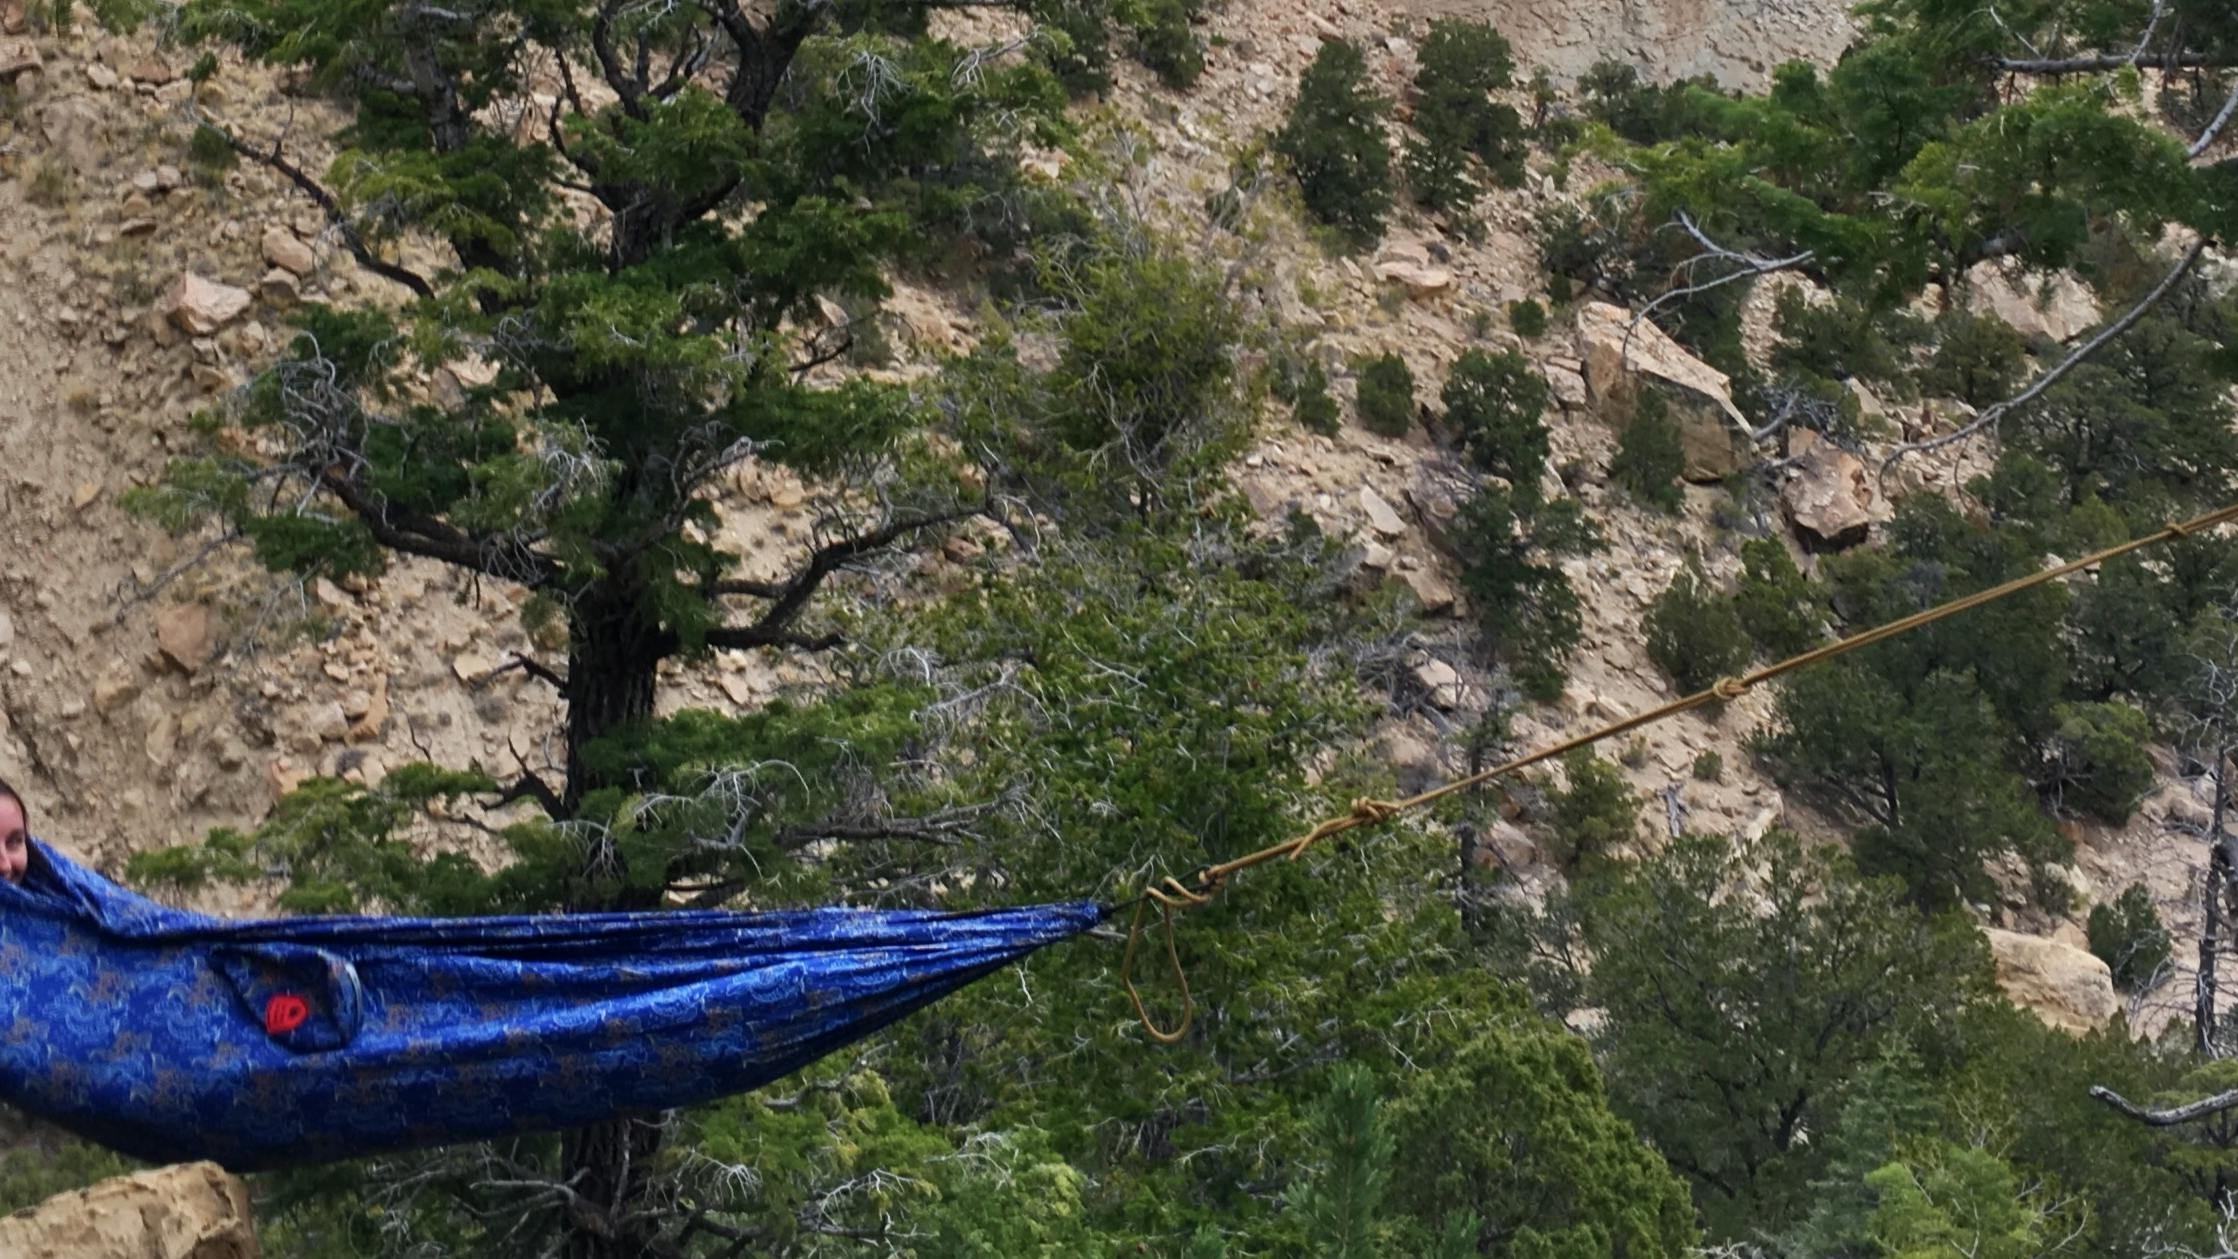 A woman peeks out of a blue hammock which is hanging between two trees.